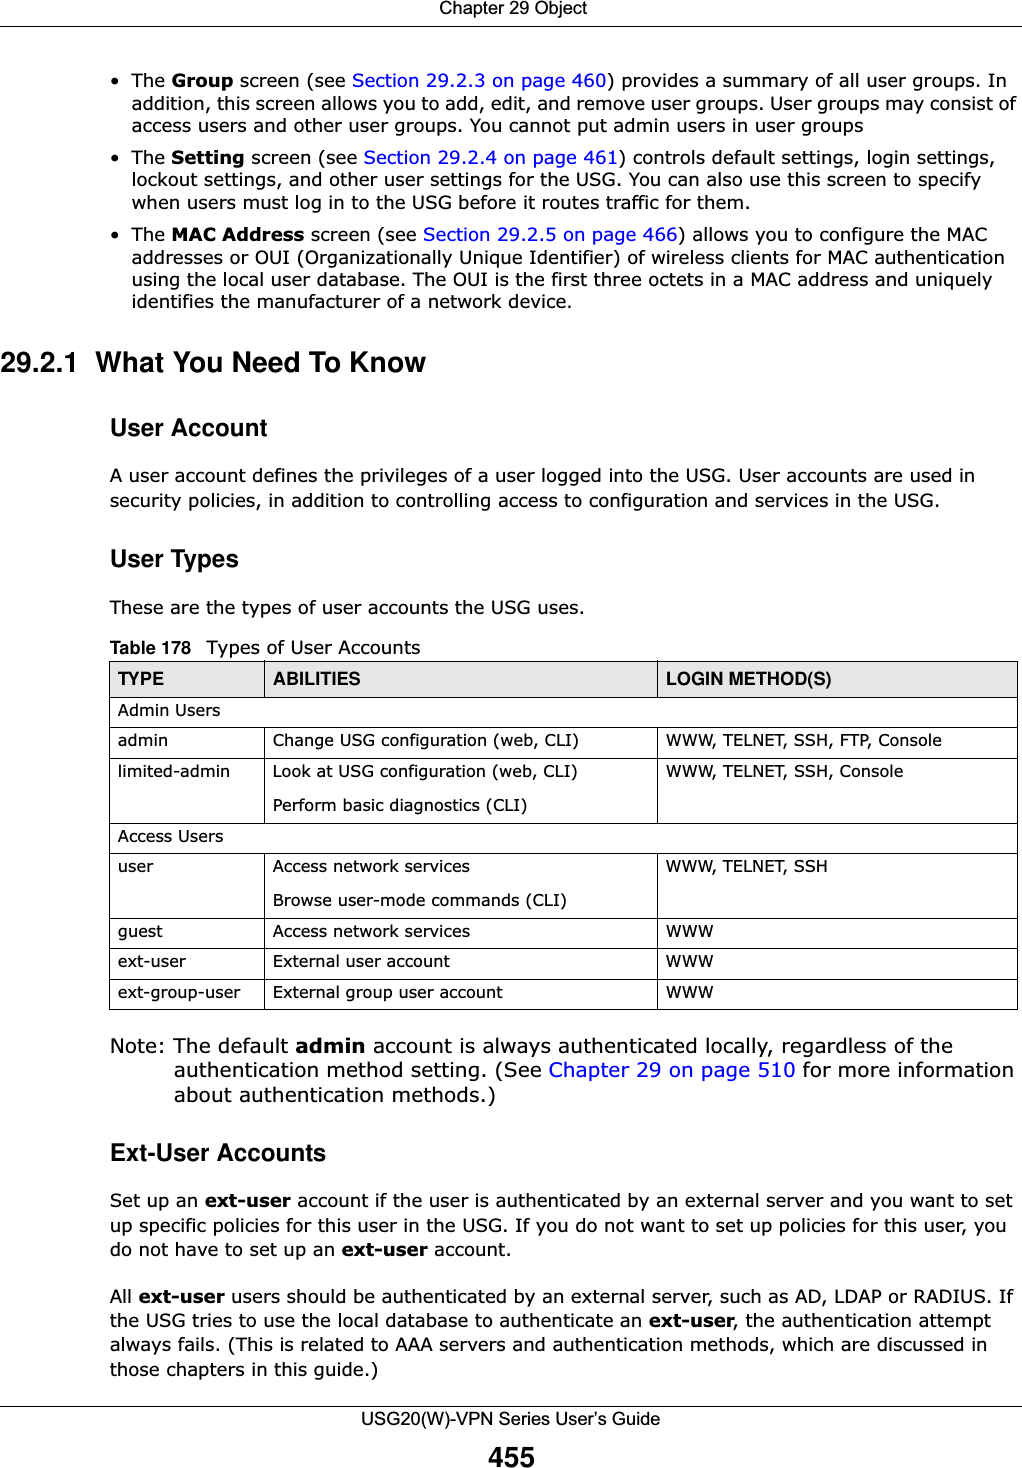  Chapter 29 ObjectUSG20(W)-VPN Series User’s Guide455•The Group screen (see Section 29.2.3 on page 460) provides a summary of all user groups. In addition, this screen allows you to add, edit, and remove user groups. User groups may consist of access users and other user groups. You cannot put admin users in user groups•The Setting screen (see Section 29.2.4 on page 461) controls default settings, login settings, lockout settings, and other user settings for the USG. You can also use this screen to specify when users must log in to the USG before it routes traffic for them.•The MAC Address screen (see Section 29.2.5 on page 466) allows you to configure the MAC addresses or OUI (Organizationally Unique Identifier) of wireless clients for MAC authentication using the local user database. The OUI is the first three octets in a MAC address and uniquely identifies the manufacturer of a network device.29.2.1  What You Need To KnowUser AccountA user account defines the privileges of a user logged into the USG. User accounts are used in security policies, in addition to controlling access to configuration and services in the USG.User TypesThese are the types of user accounts the USG uses.  Note: The default admin account is always authenticated locally, regardless of the authentication method setting. (See Chapter 29 on page 510 for more information about authentication methods.)Ext-User AccountsSet up an ext-user account if the user is authenticated by an external server and you want to set up specific policies for this user in the USG. If you do not want to set up policies for this user, you do not have to set up an ext-user account.All ext-user users should be authenticated by an external server, such as AD, LDAP or RADIUS. If the USG tries to use the local database to authenticate an ext-user, the authentication attempt always fails. (This is related to AAA servers and authentication methods, which are discussed in those chapters in this guide.)Table 178   Types of User AccountsTYPE ABILITIES LOGIN METHOD(S)Admin Usersadmin Change USG configuration (web, CLI) WWW, TELNET, SSH, FTP, Consolelimited-admin Look at USG configuration (web, CLI)Perform basic diagnostics (CLI)WWW, TELNET, SSH, ConsoleAccess Usersuser Access network servicesBrowse user-mode commands (CLI)WWW, TELNET, SSHguest Access network services WWWext-user External user account WWWext-group-user External group user account WWW